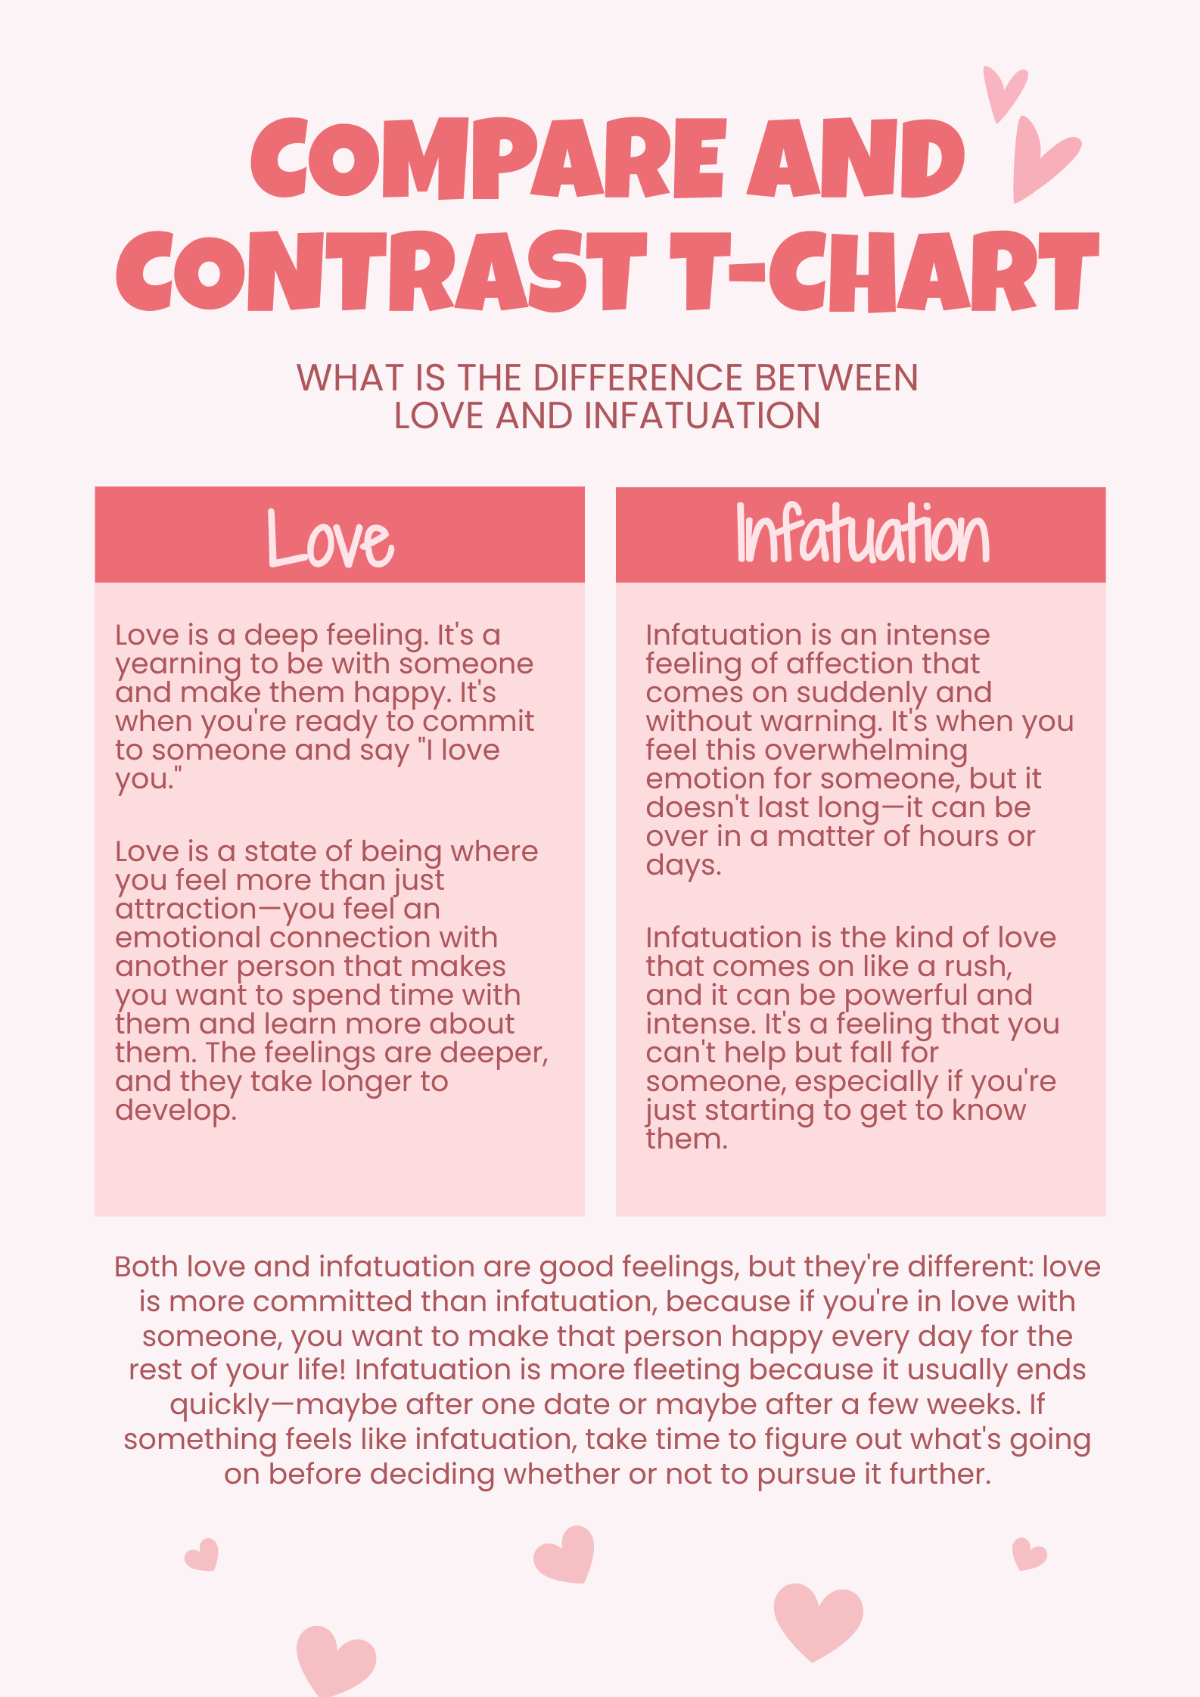 Compare and Contrast T-Chart